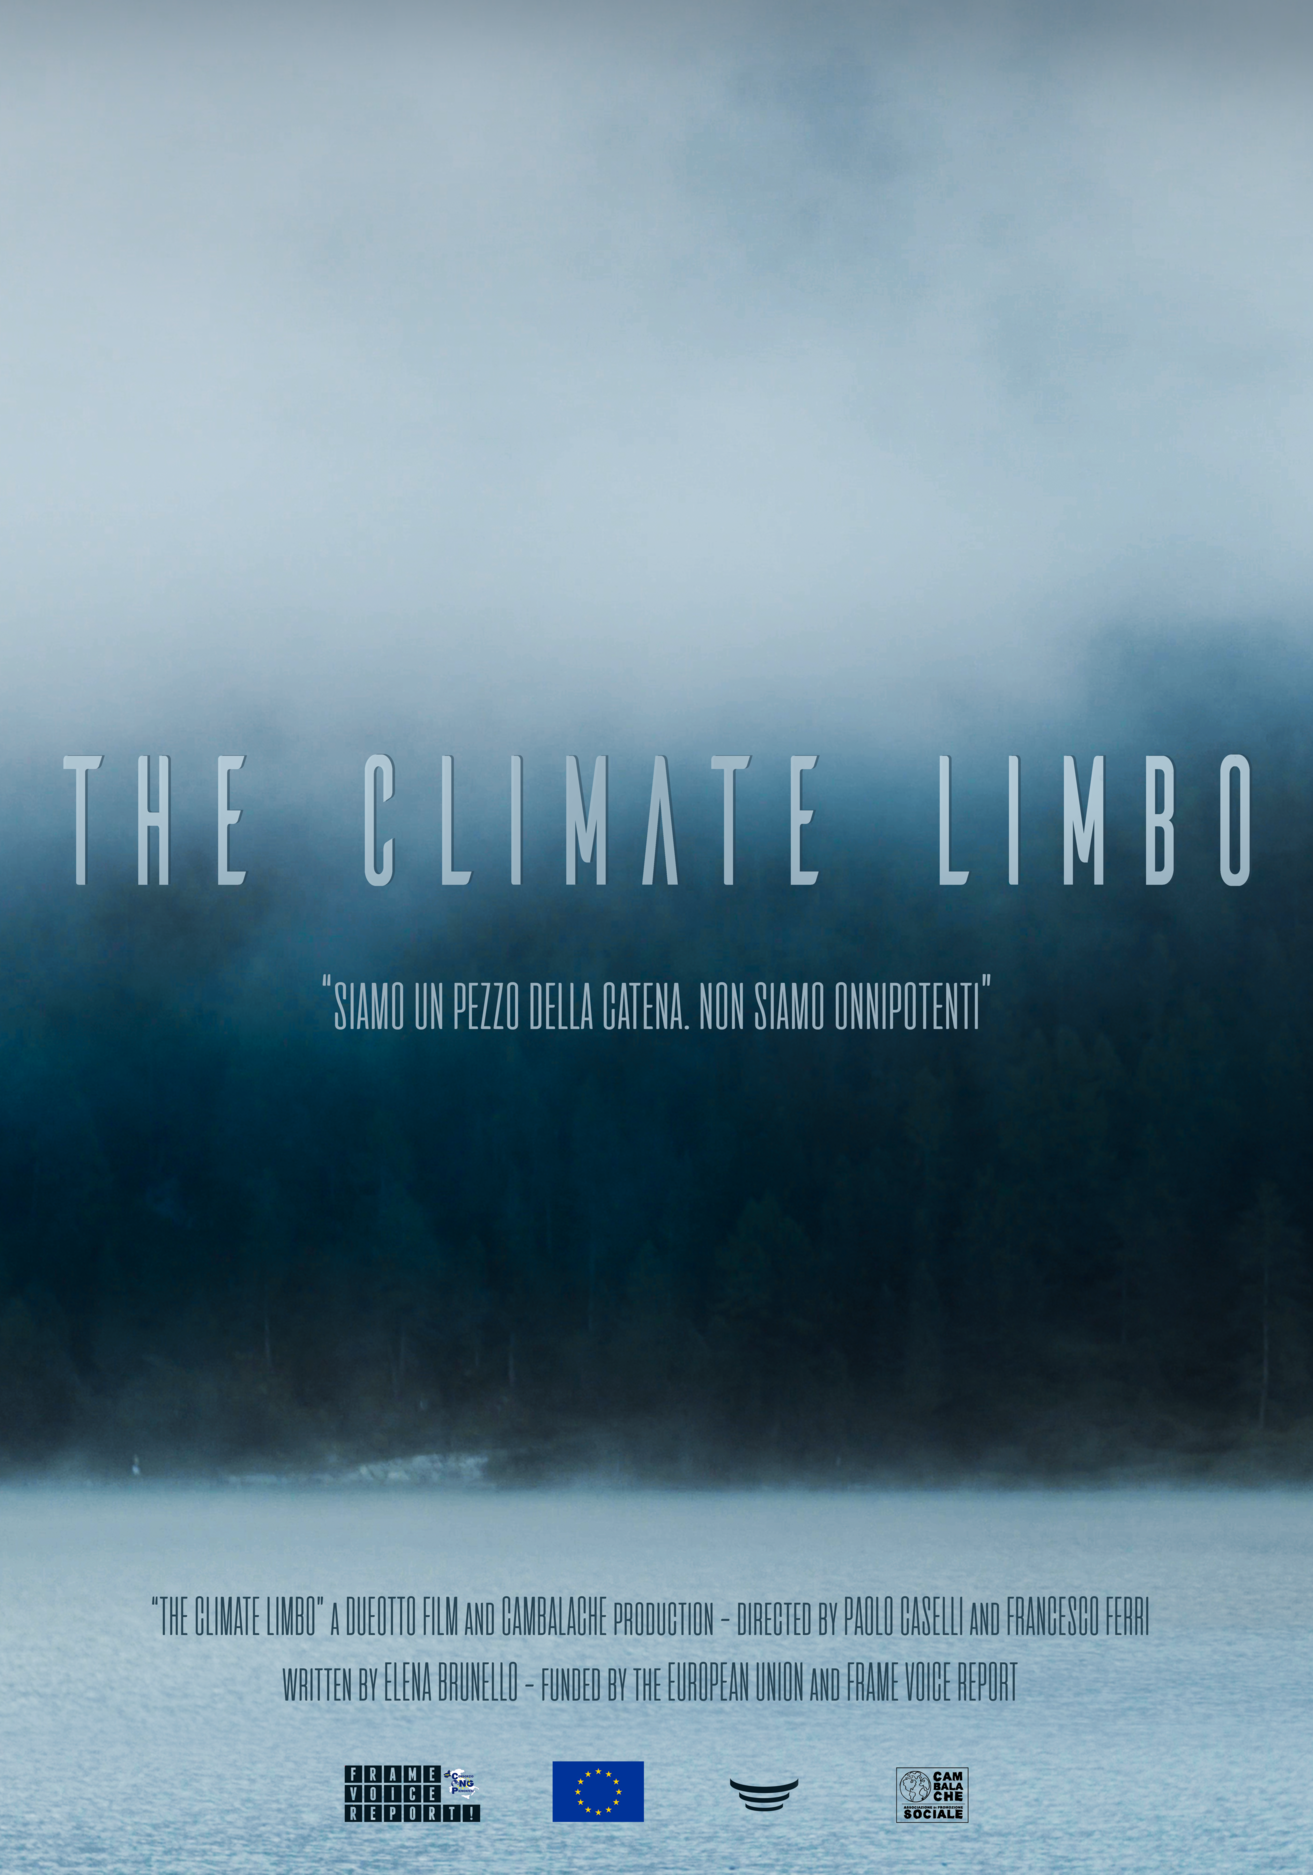 The Climate Limbo